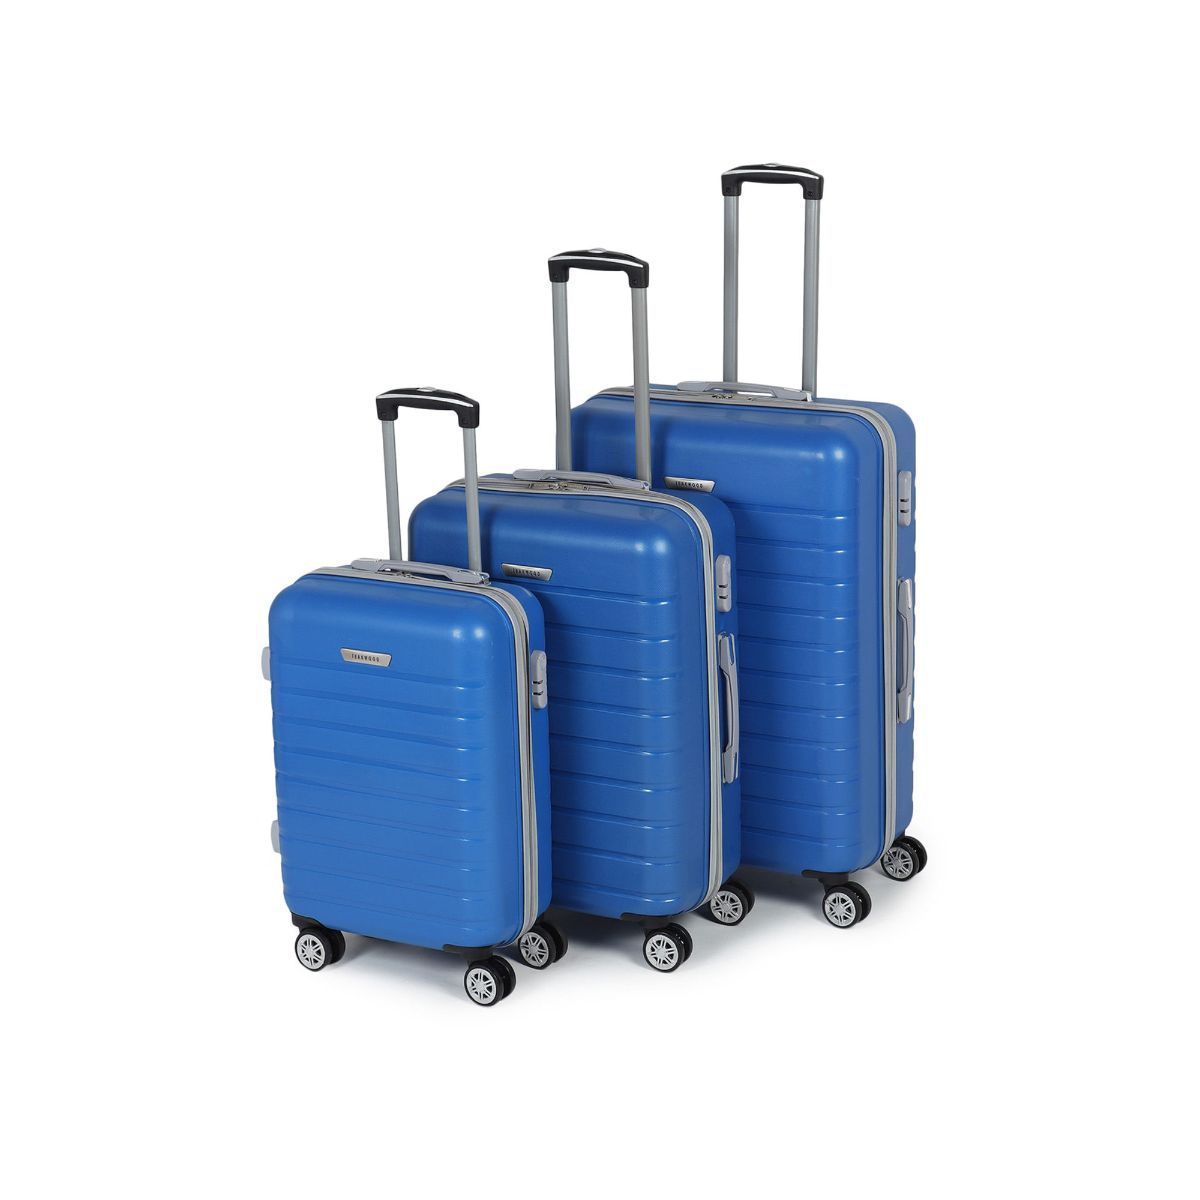 EasyJet 45x36x20 & 56x45x25 Max Large Cabin Hand Luggage Suitcase  Trolley Bags | eBay